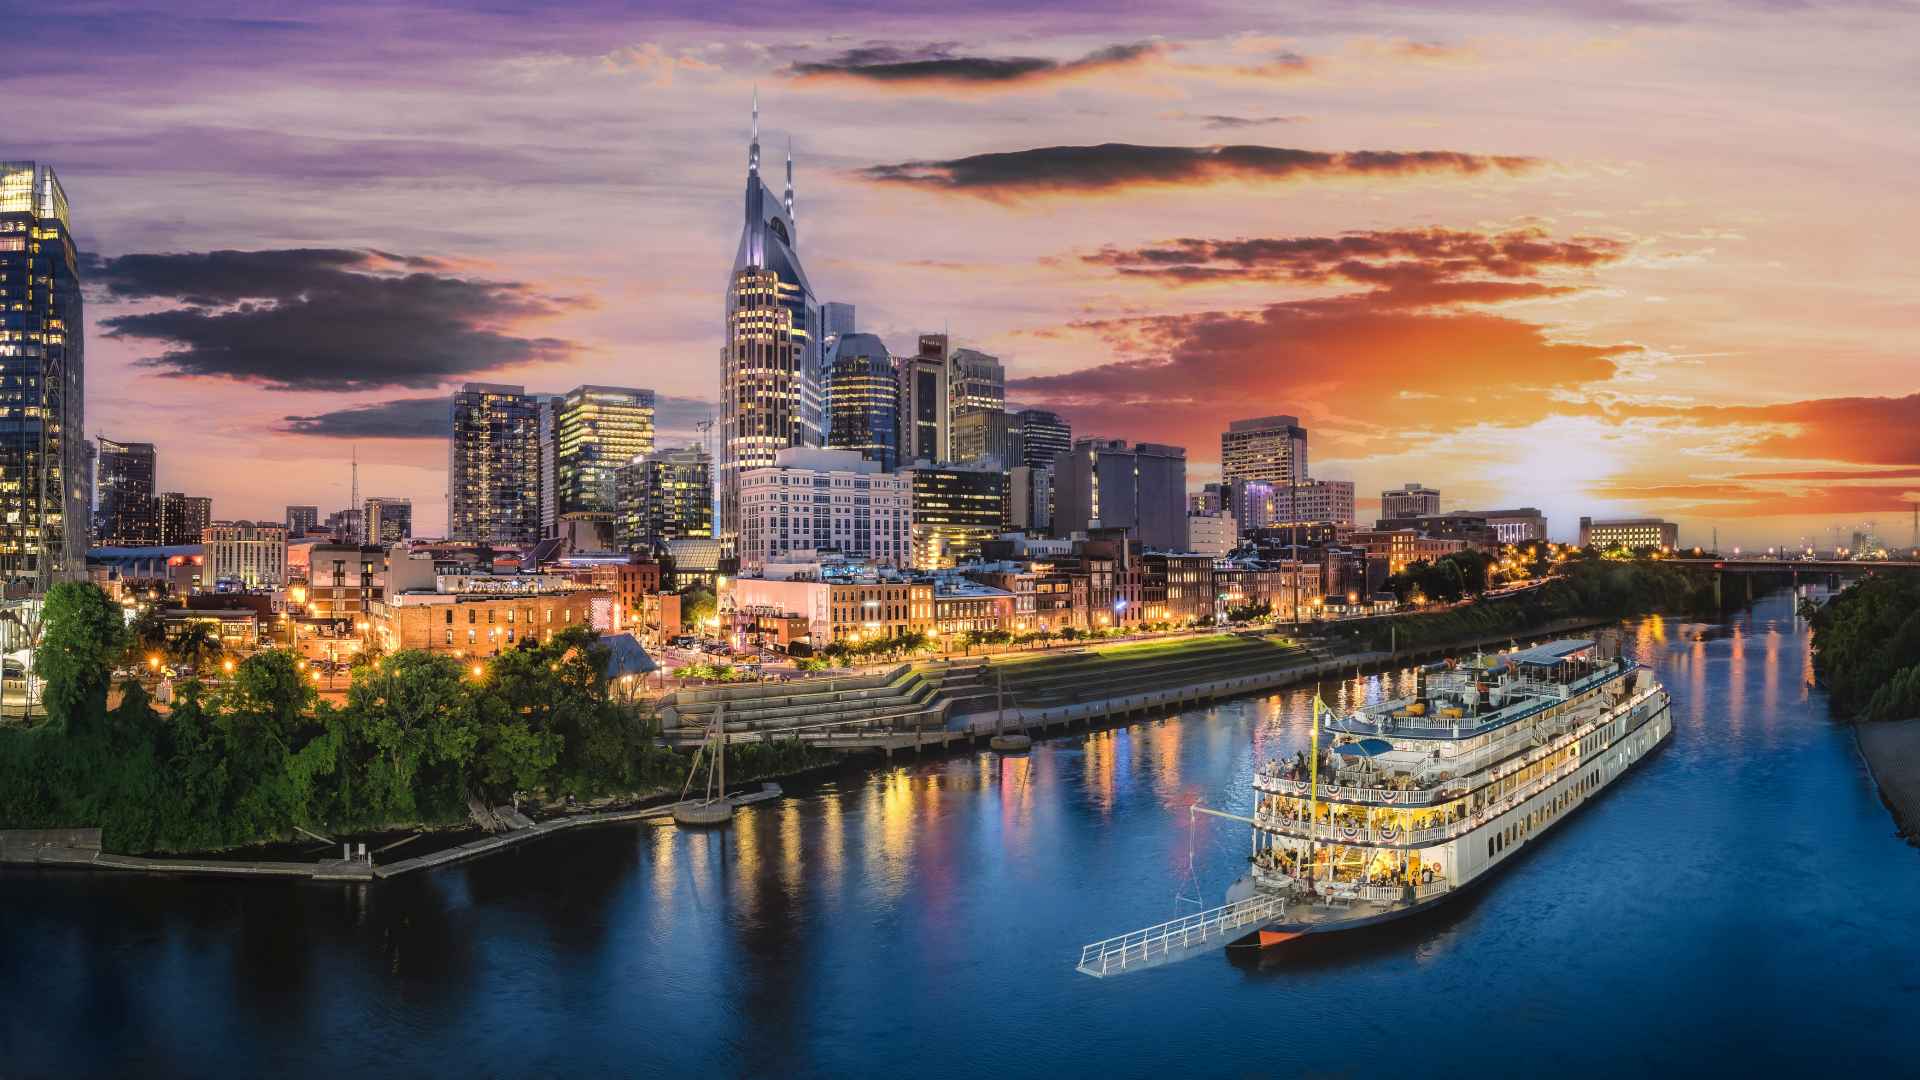 I’m a Real Estate Investor: 11 Southern Cities You Should Invest In Now